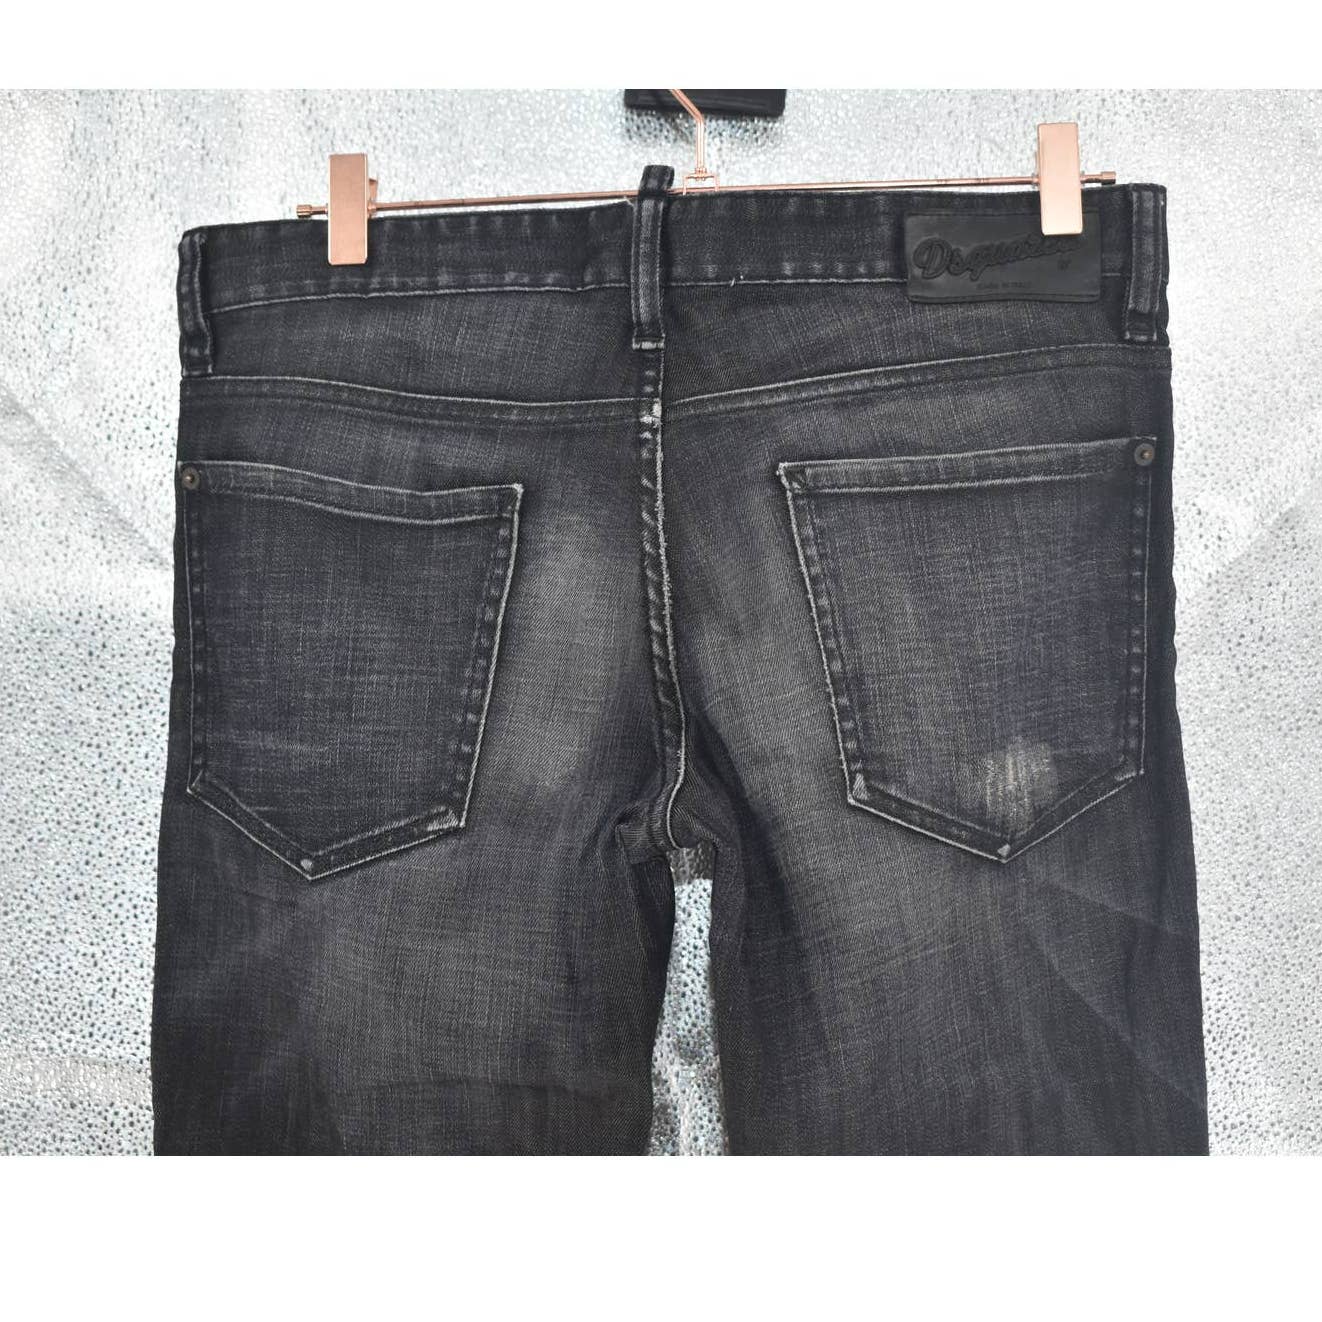 Dsquared2 Black Distressed Denim Button Fly Jeans - 48 / 32